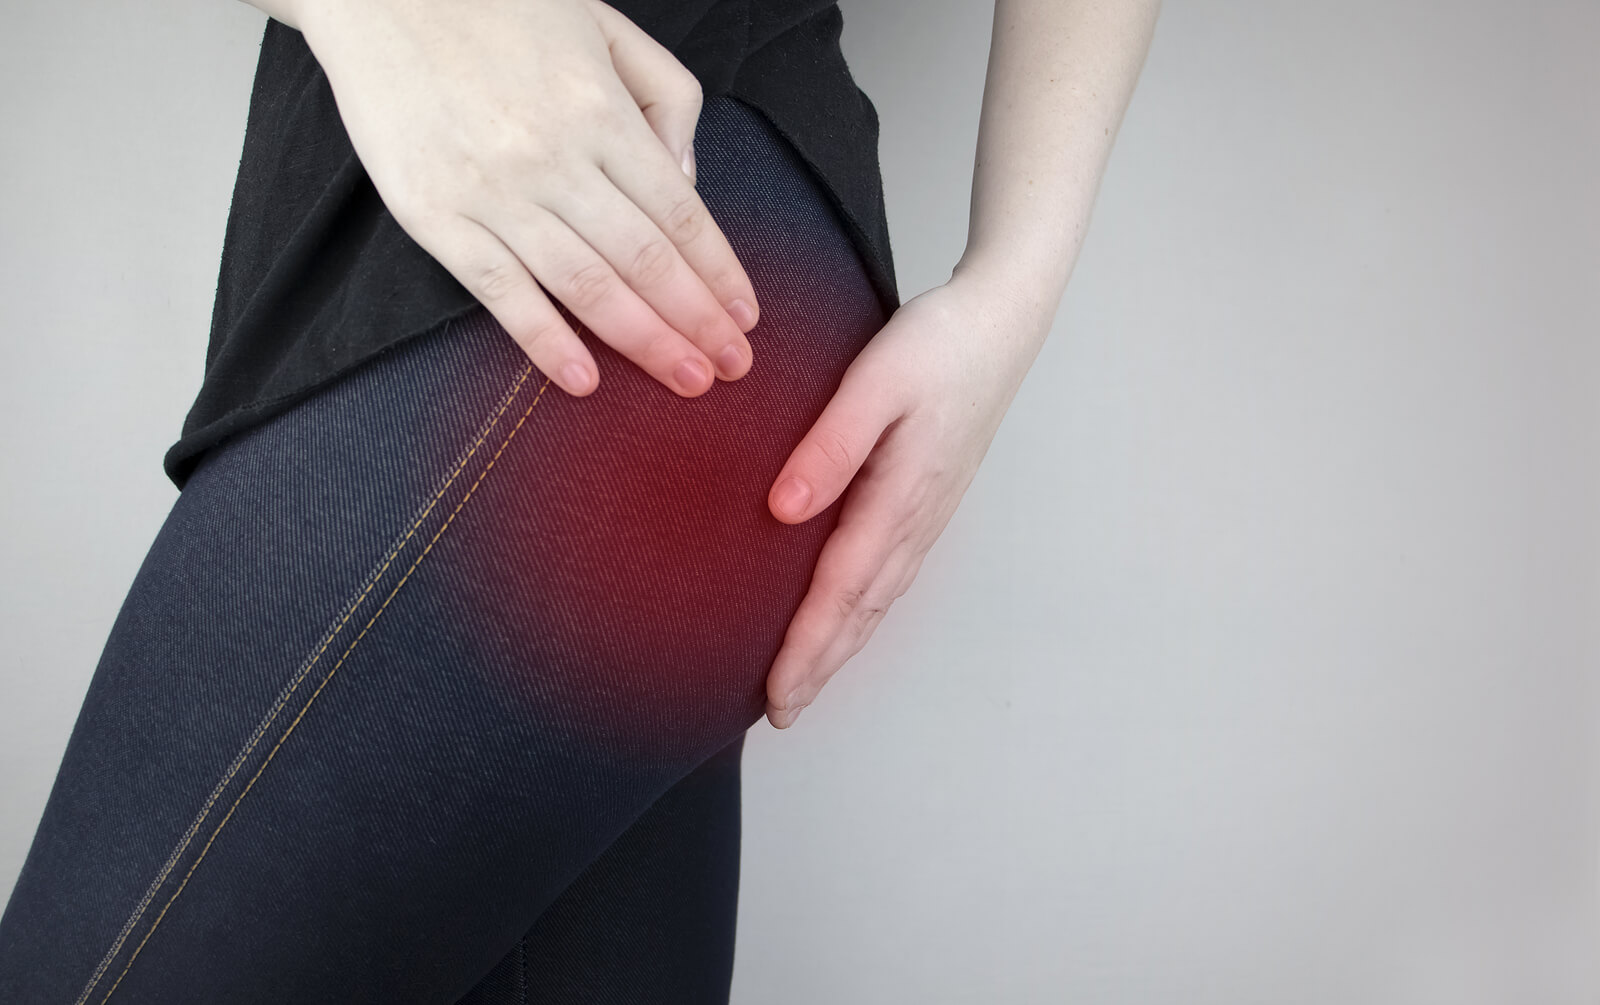 Among the differences between kidney pain and low back pain are the characteristics of the pain and the associated symptoms.